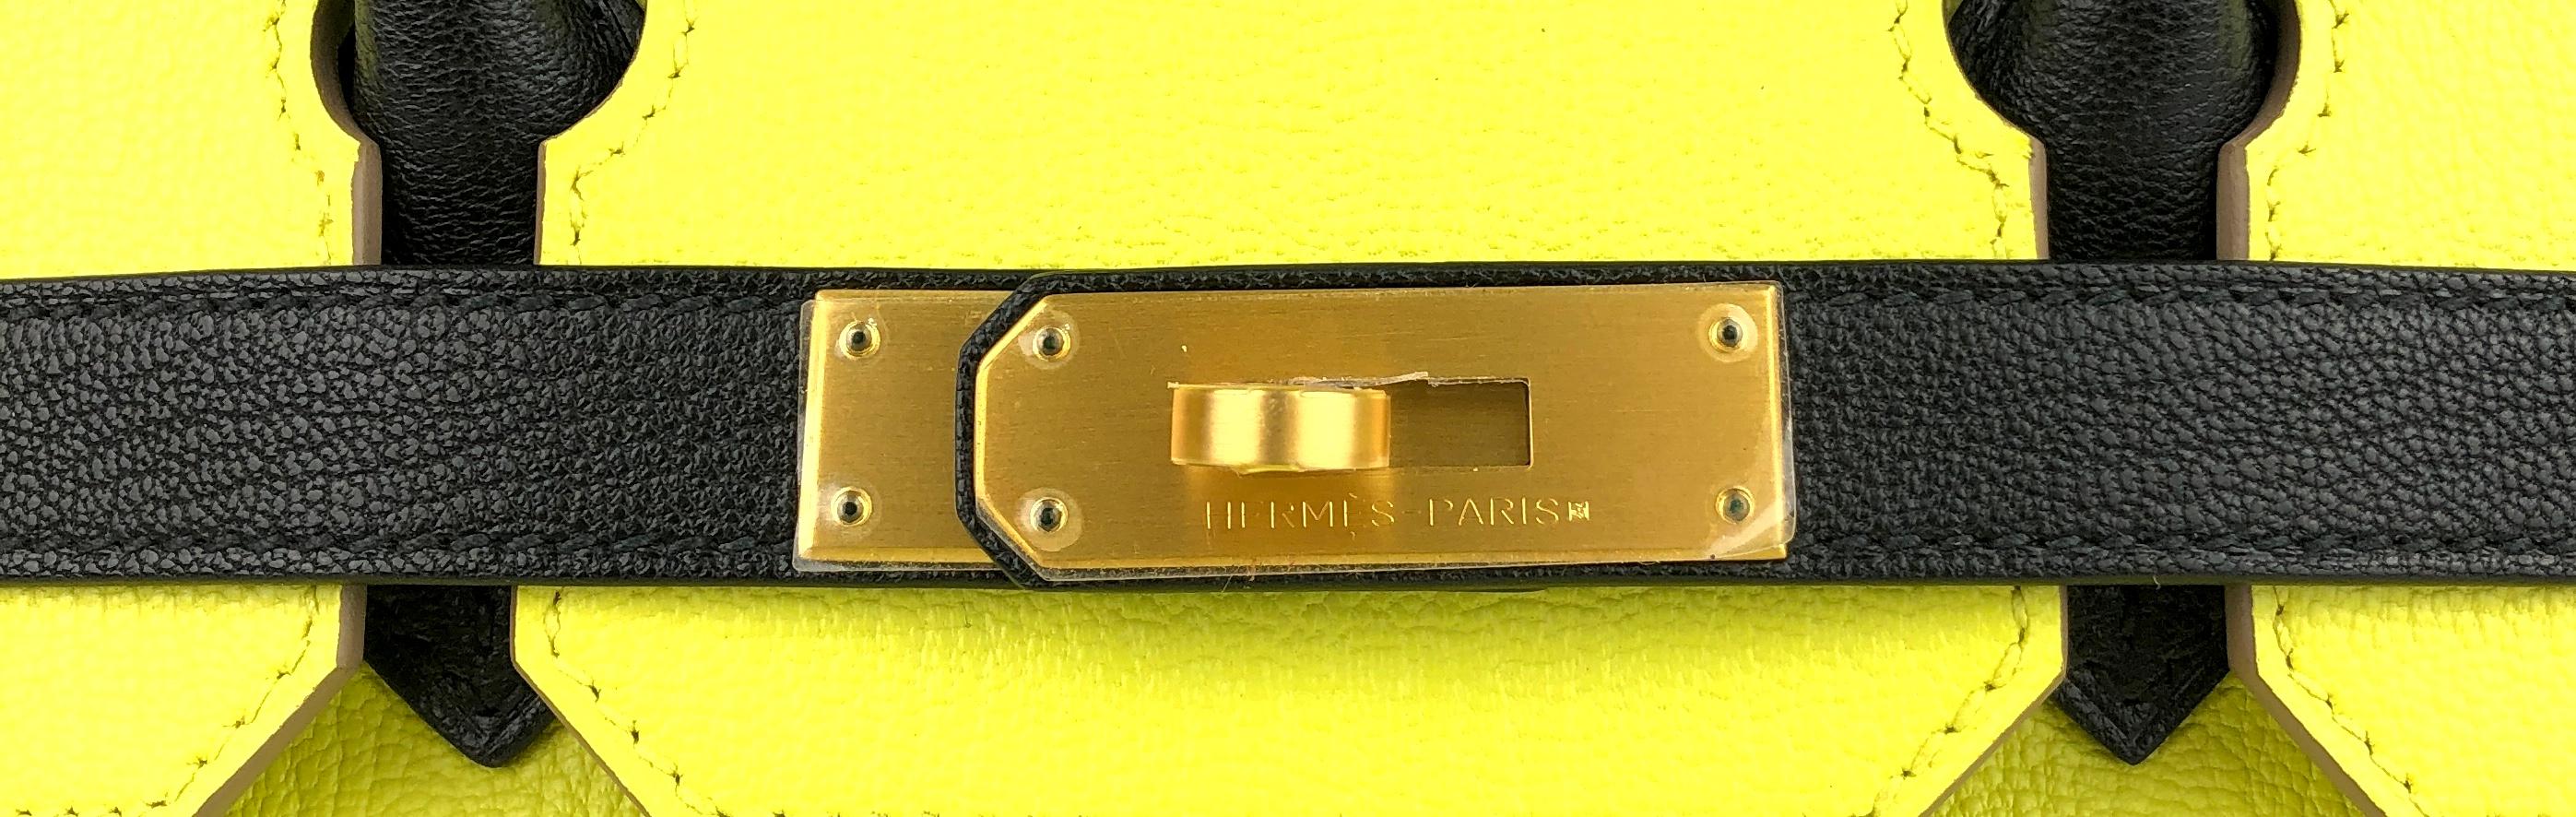 Hermes Birkin 30 Special Order Black Lime Yellow Chèvre Brushed Gold Hardware In New Condition For Sale In Miami, FL